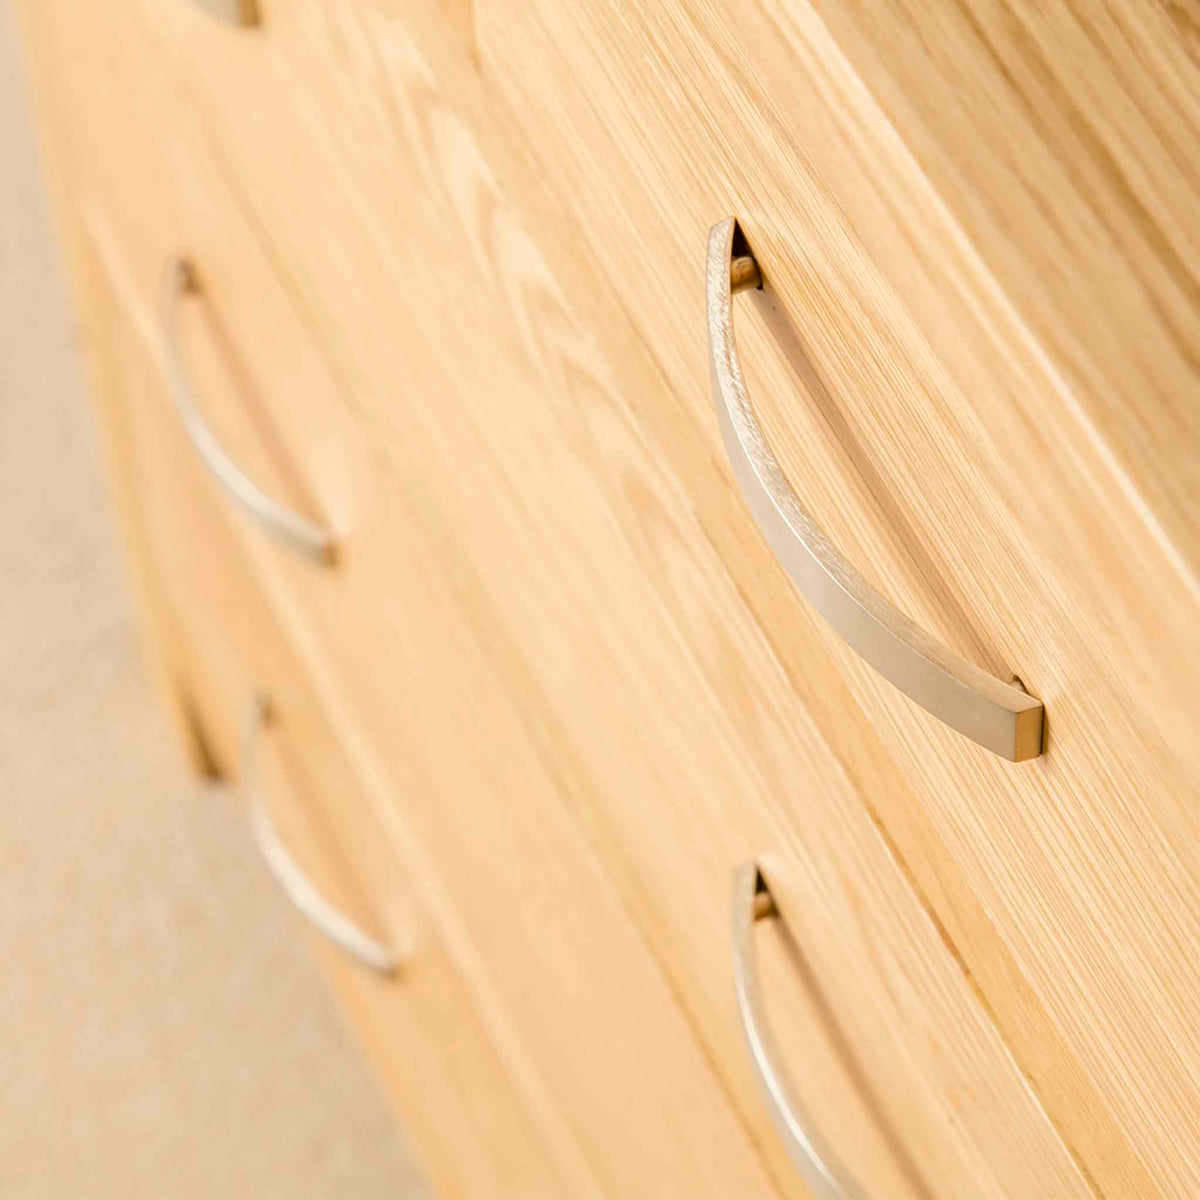 London Oak Large 6 Drawer Chest of Drawers - Looking down on drawer fronts